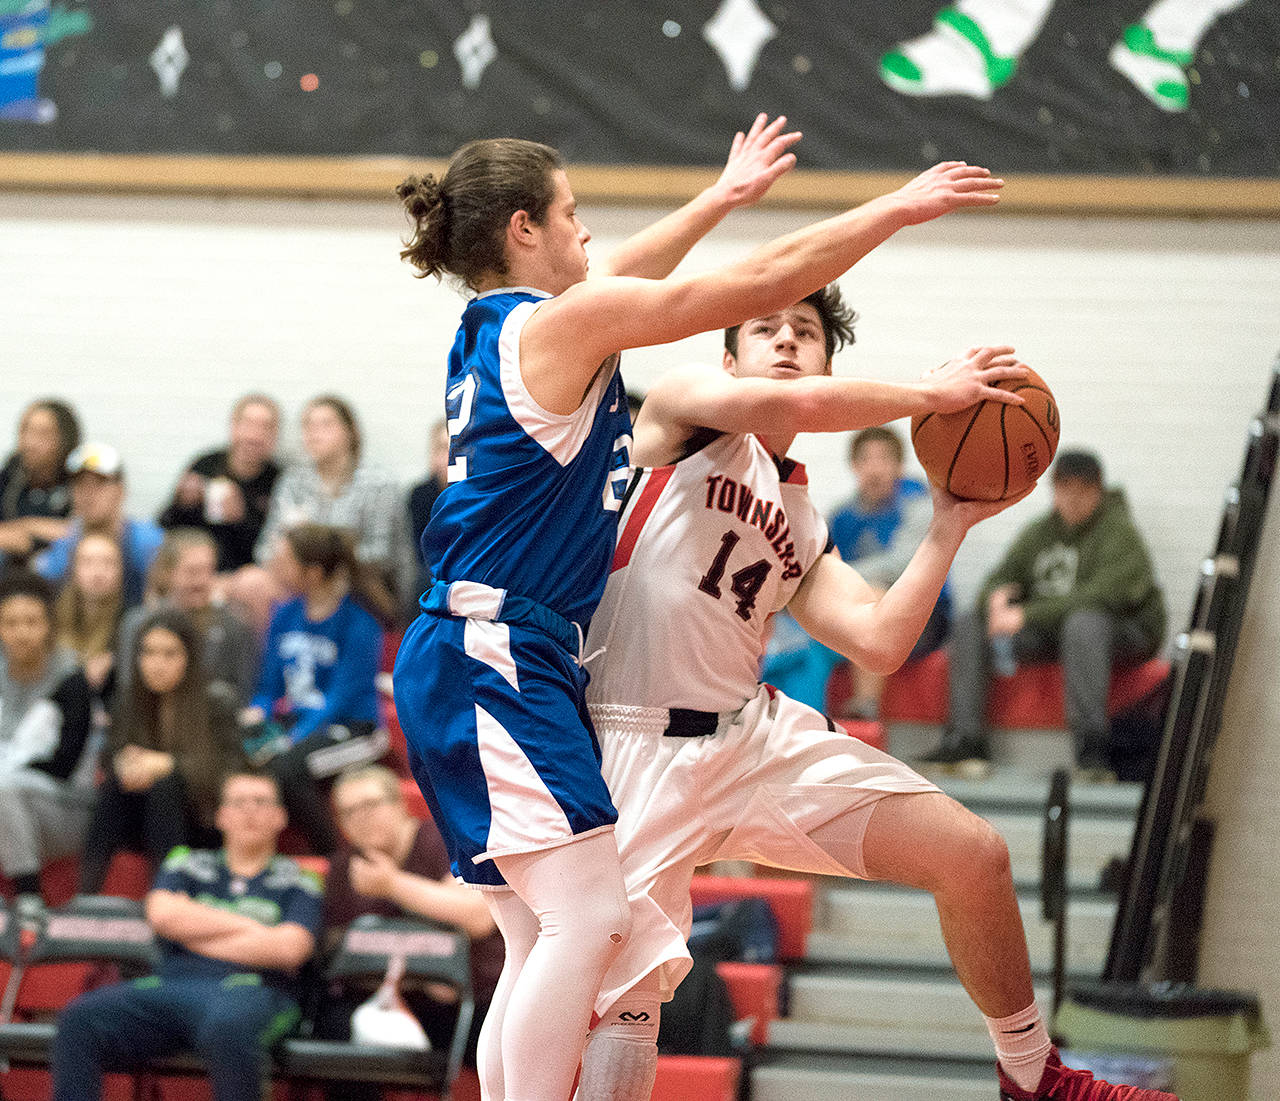 Steve Mullensky/for Peninsula Daily News Chimacum’s Cole Dotson defends Port Townsend’s Noa Montoya along the base line during a rivalry game last season.